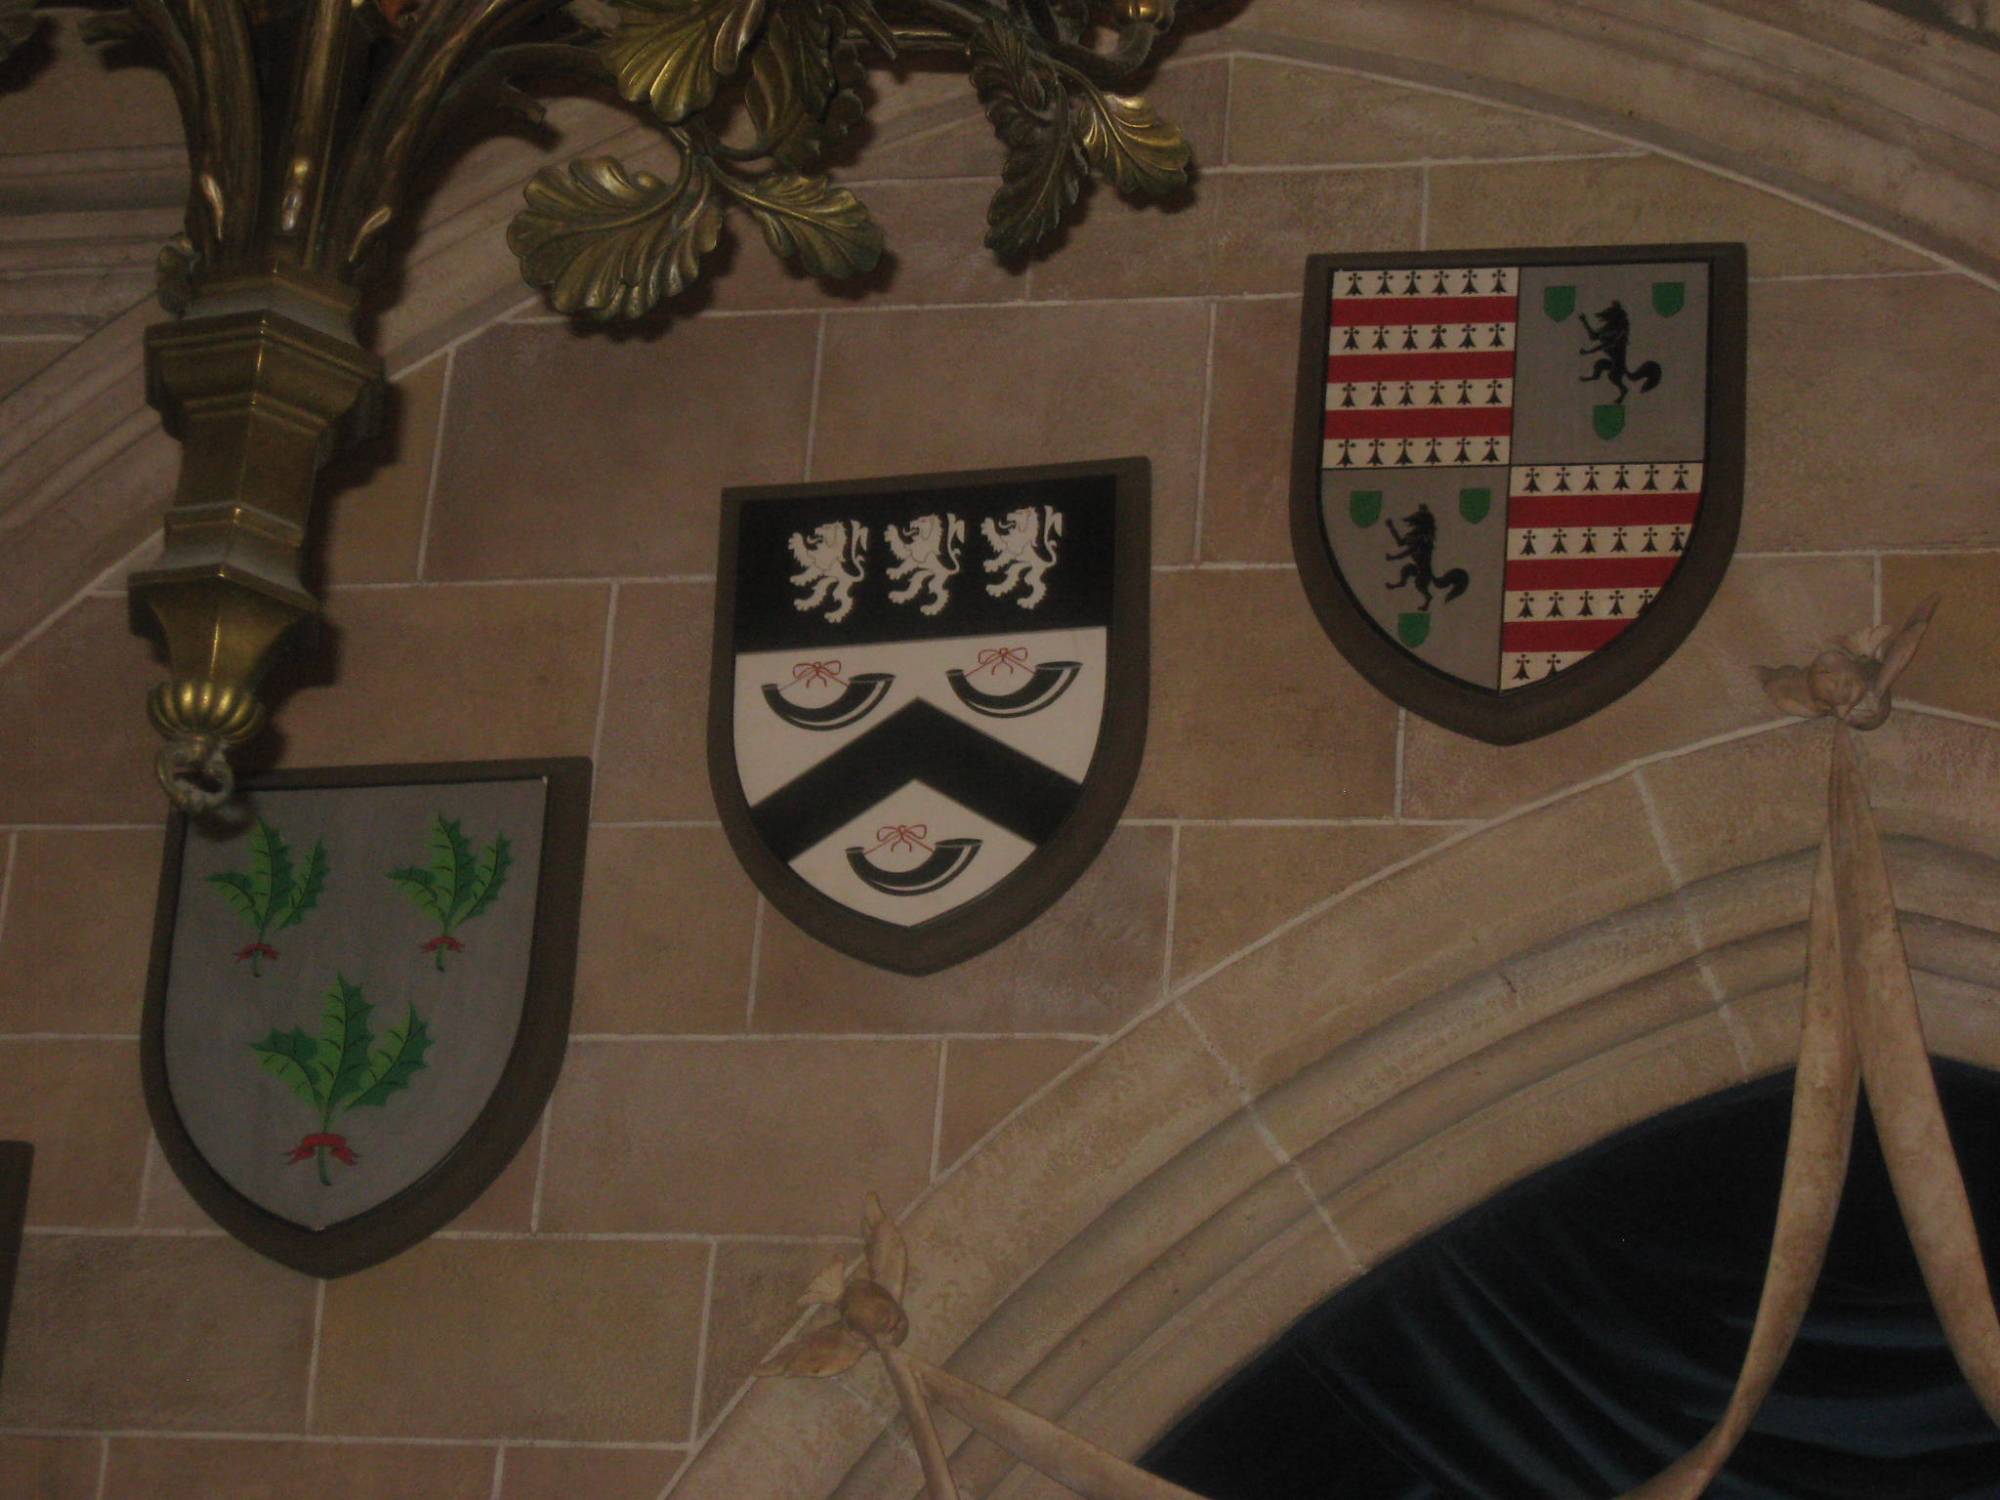 More Shields on the wall at CRT